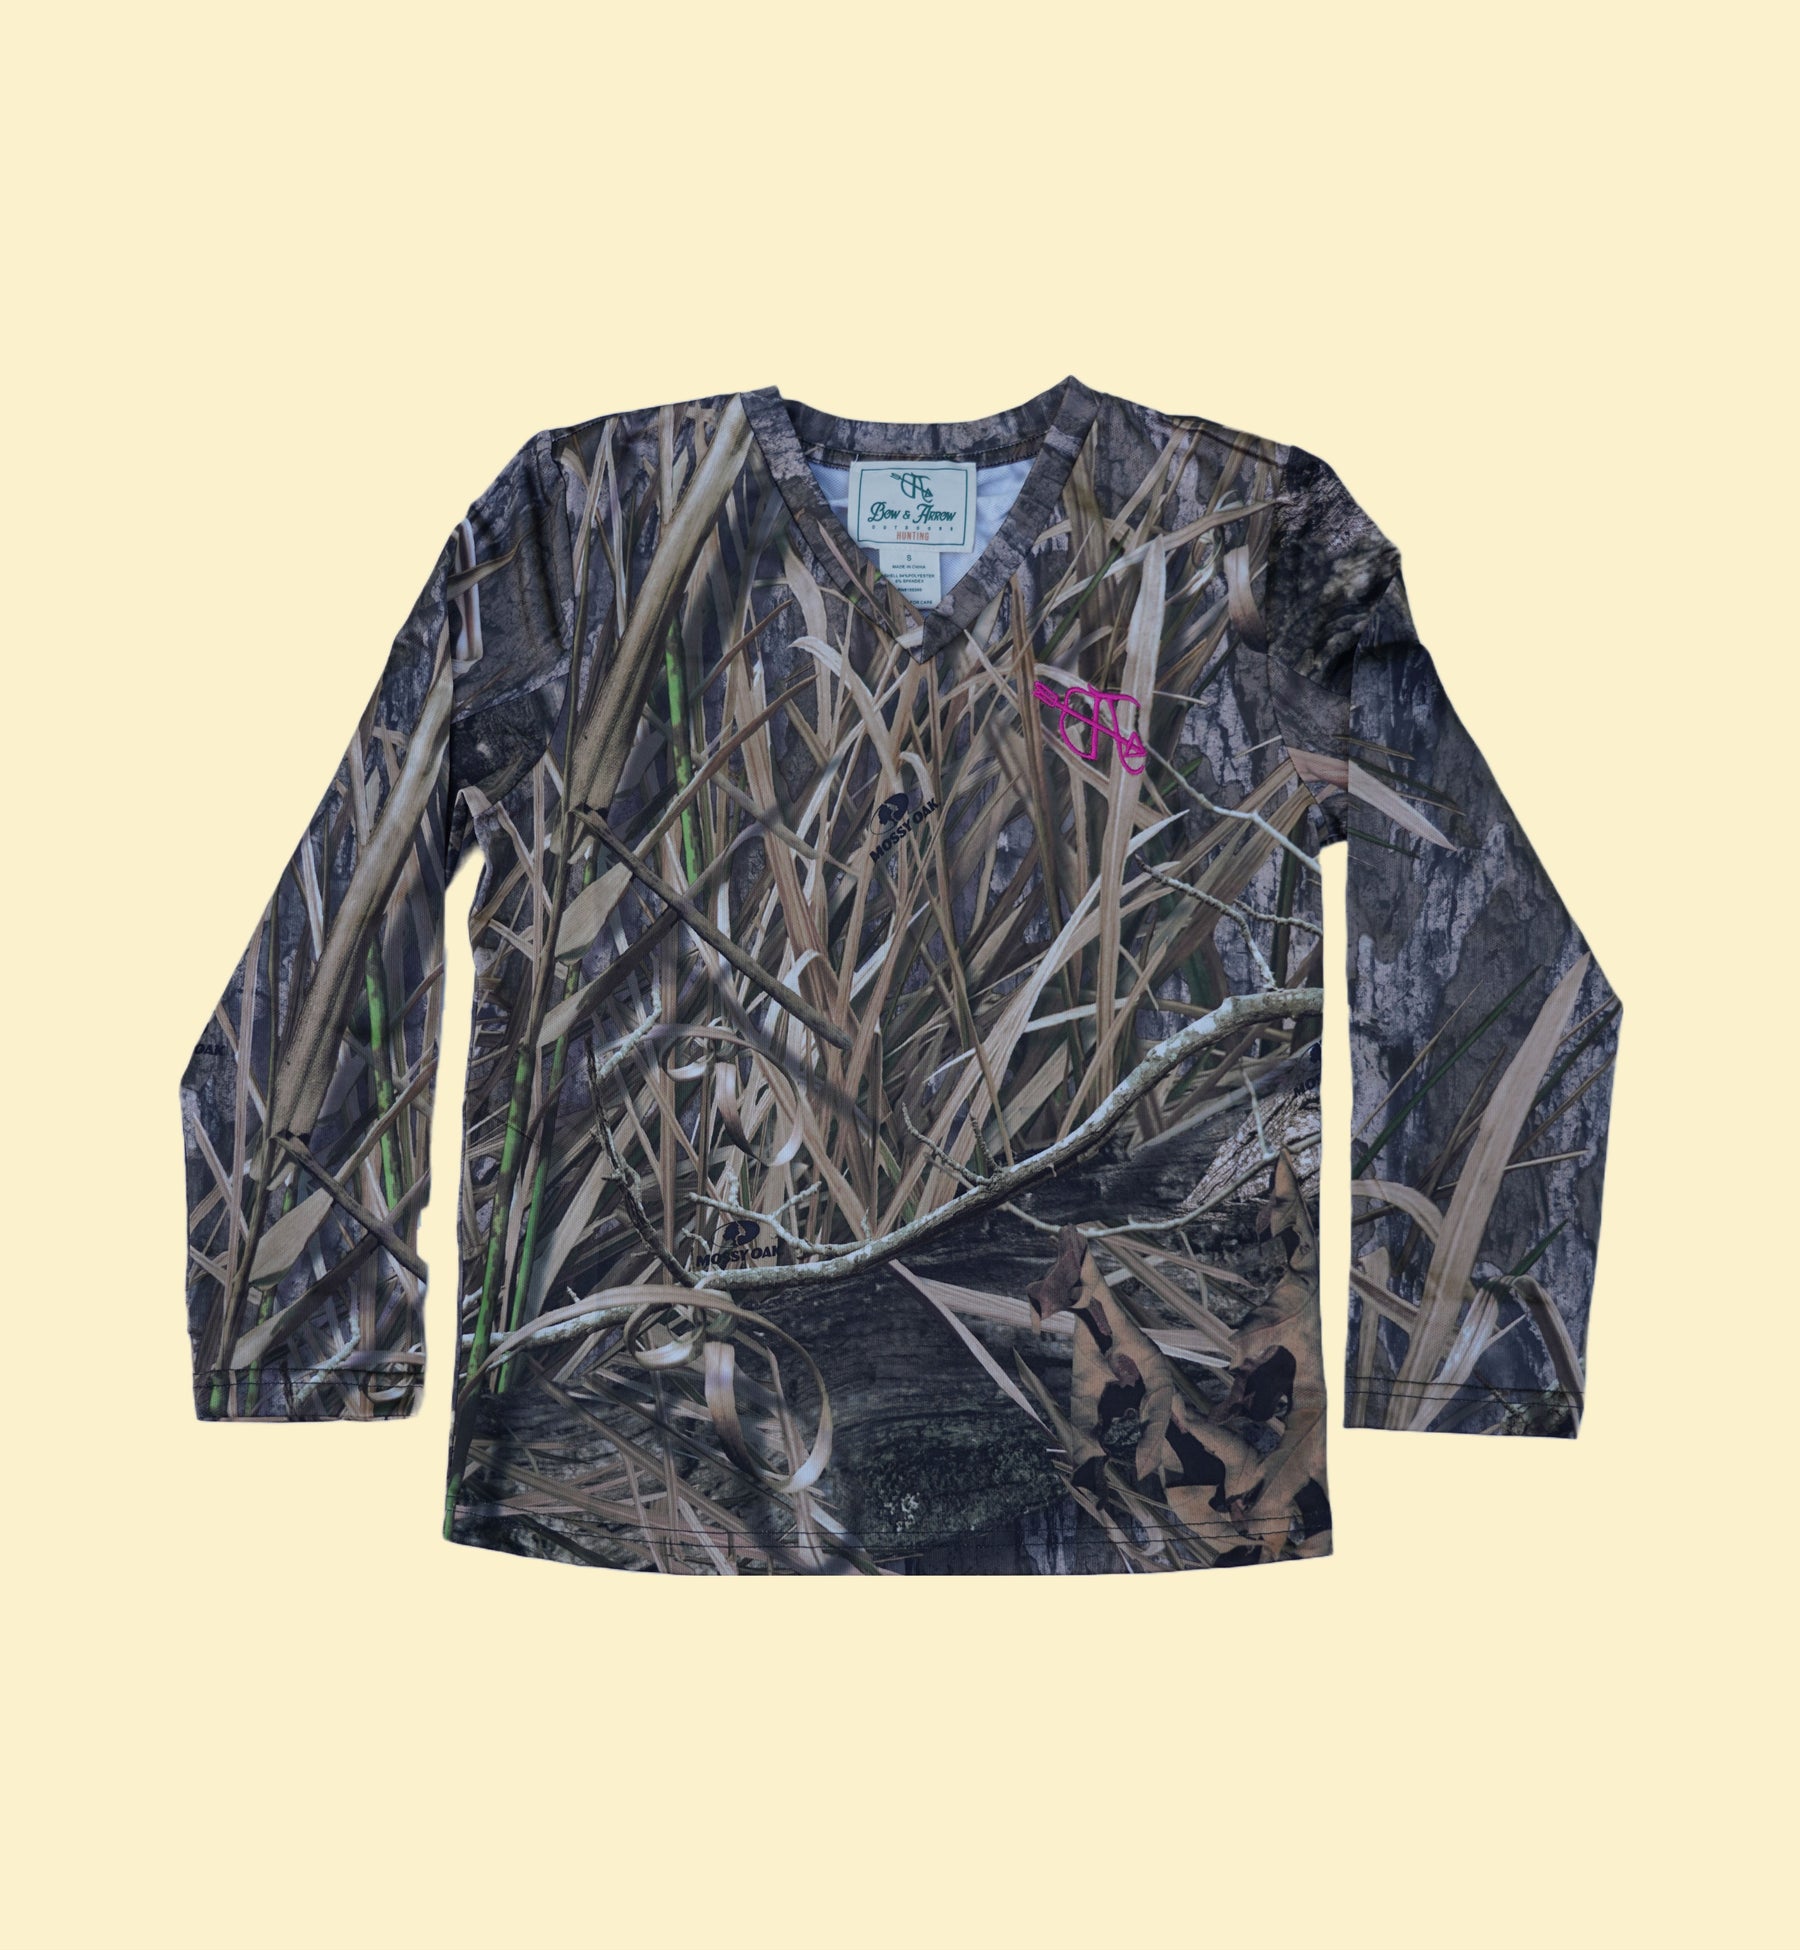 V-Neck Long Sleeve Shirt by Bow and Arrow Outdoors - Sportsman Gear